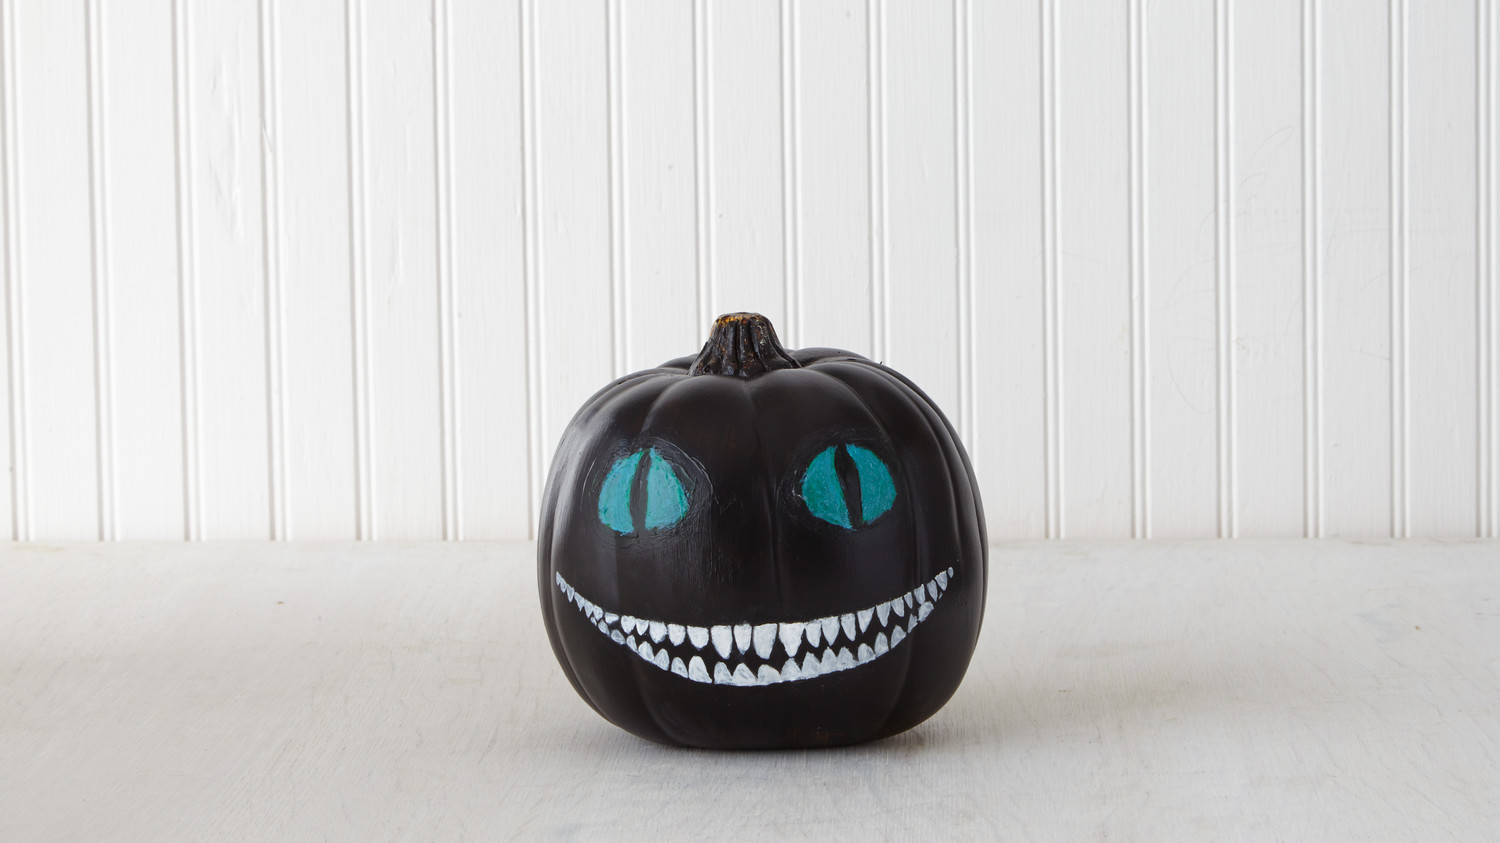 Pumpkin Decorating: The Cheshire Cat from "Alice in Wonderland